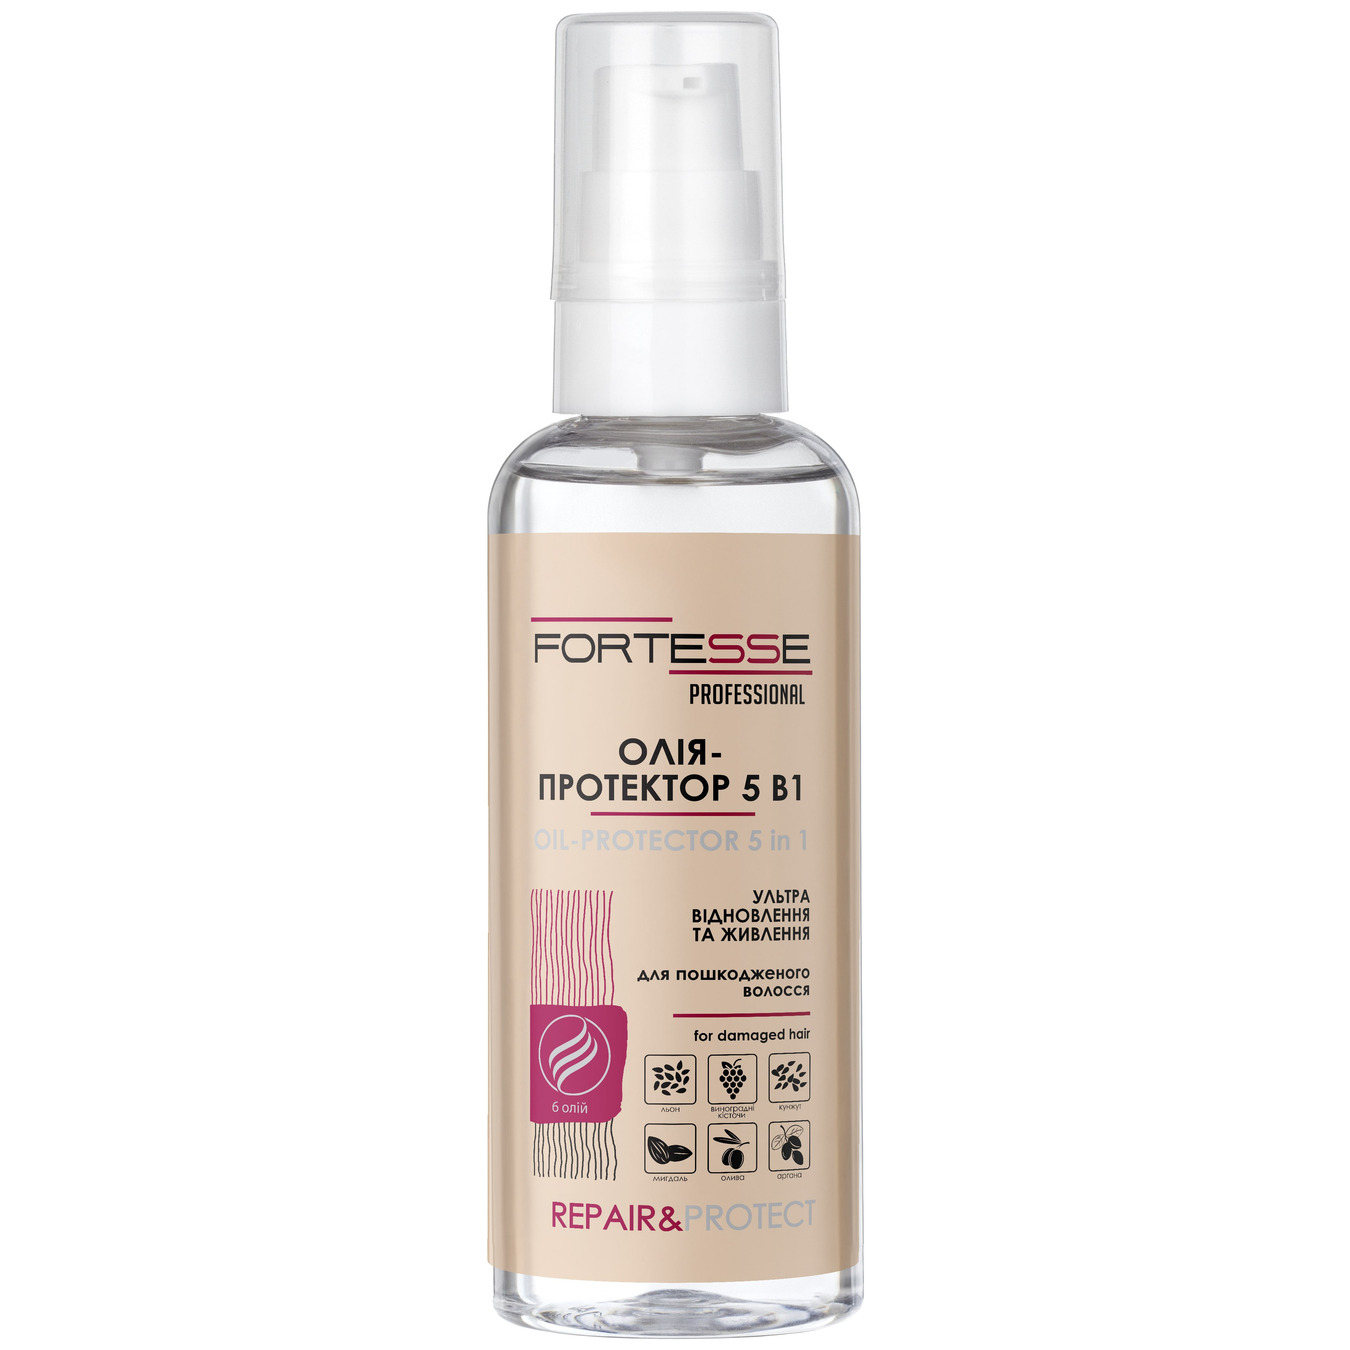 Oil-protector FORTESSE PRO 5 in 1 express restorative for dry damaged hair in need of nourishment repair&protect 60ml